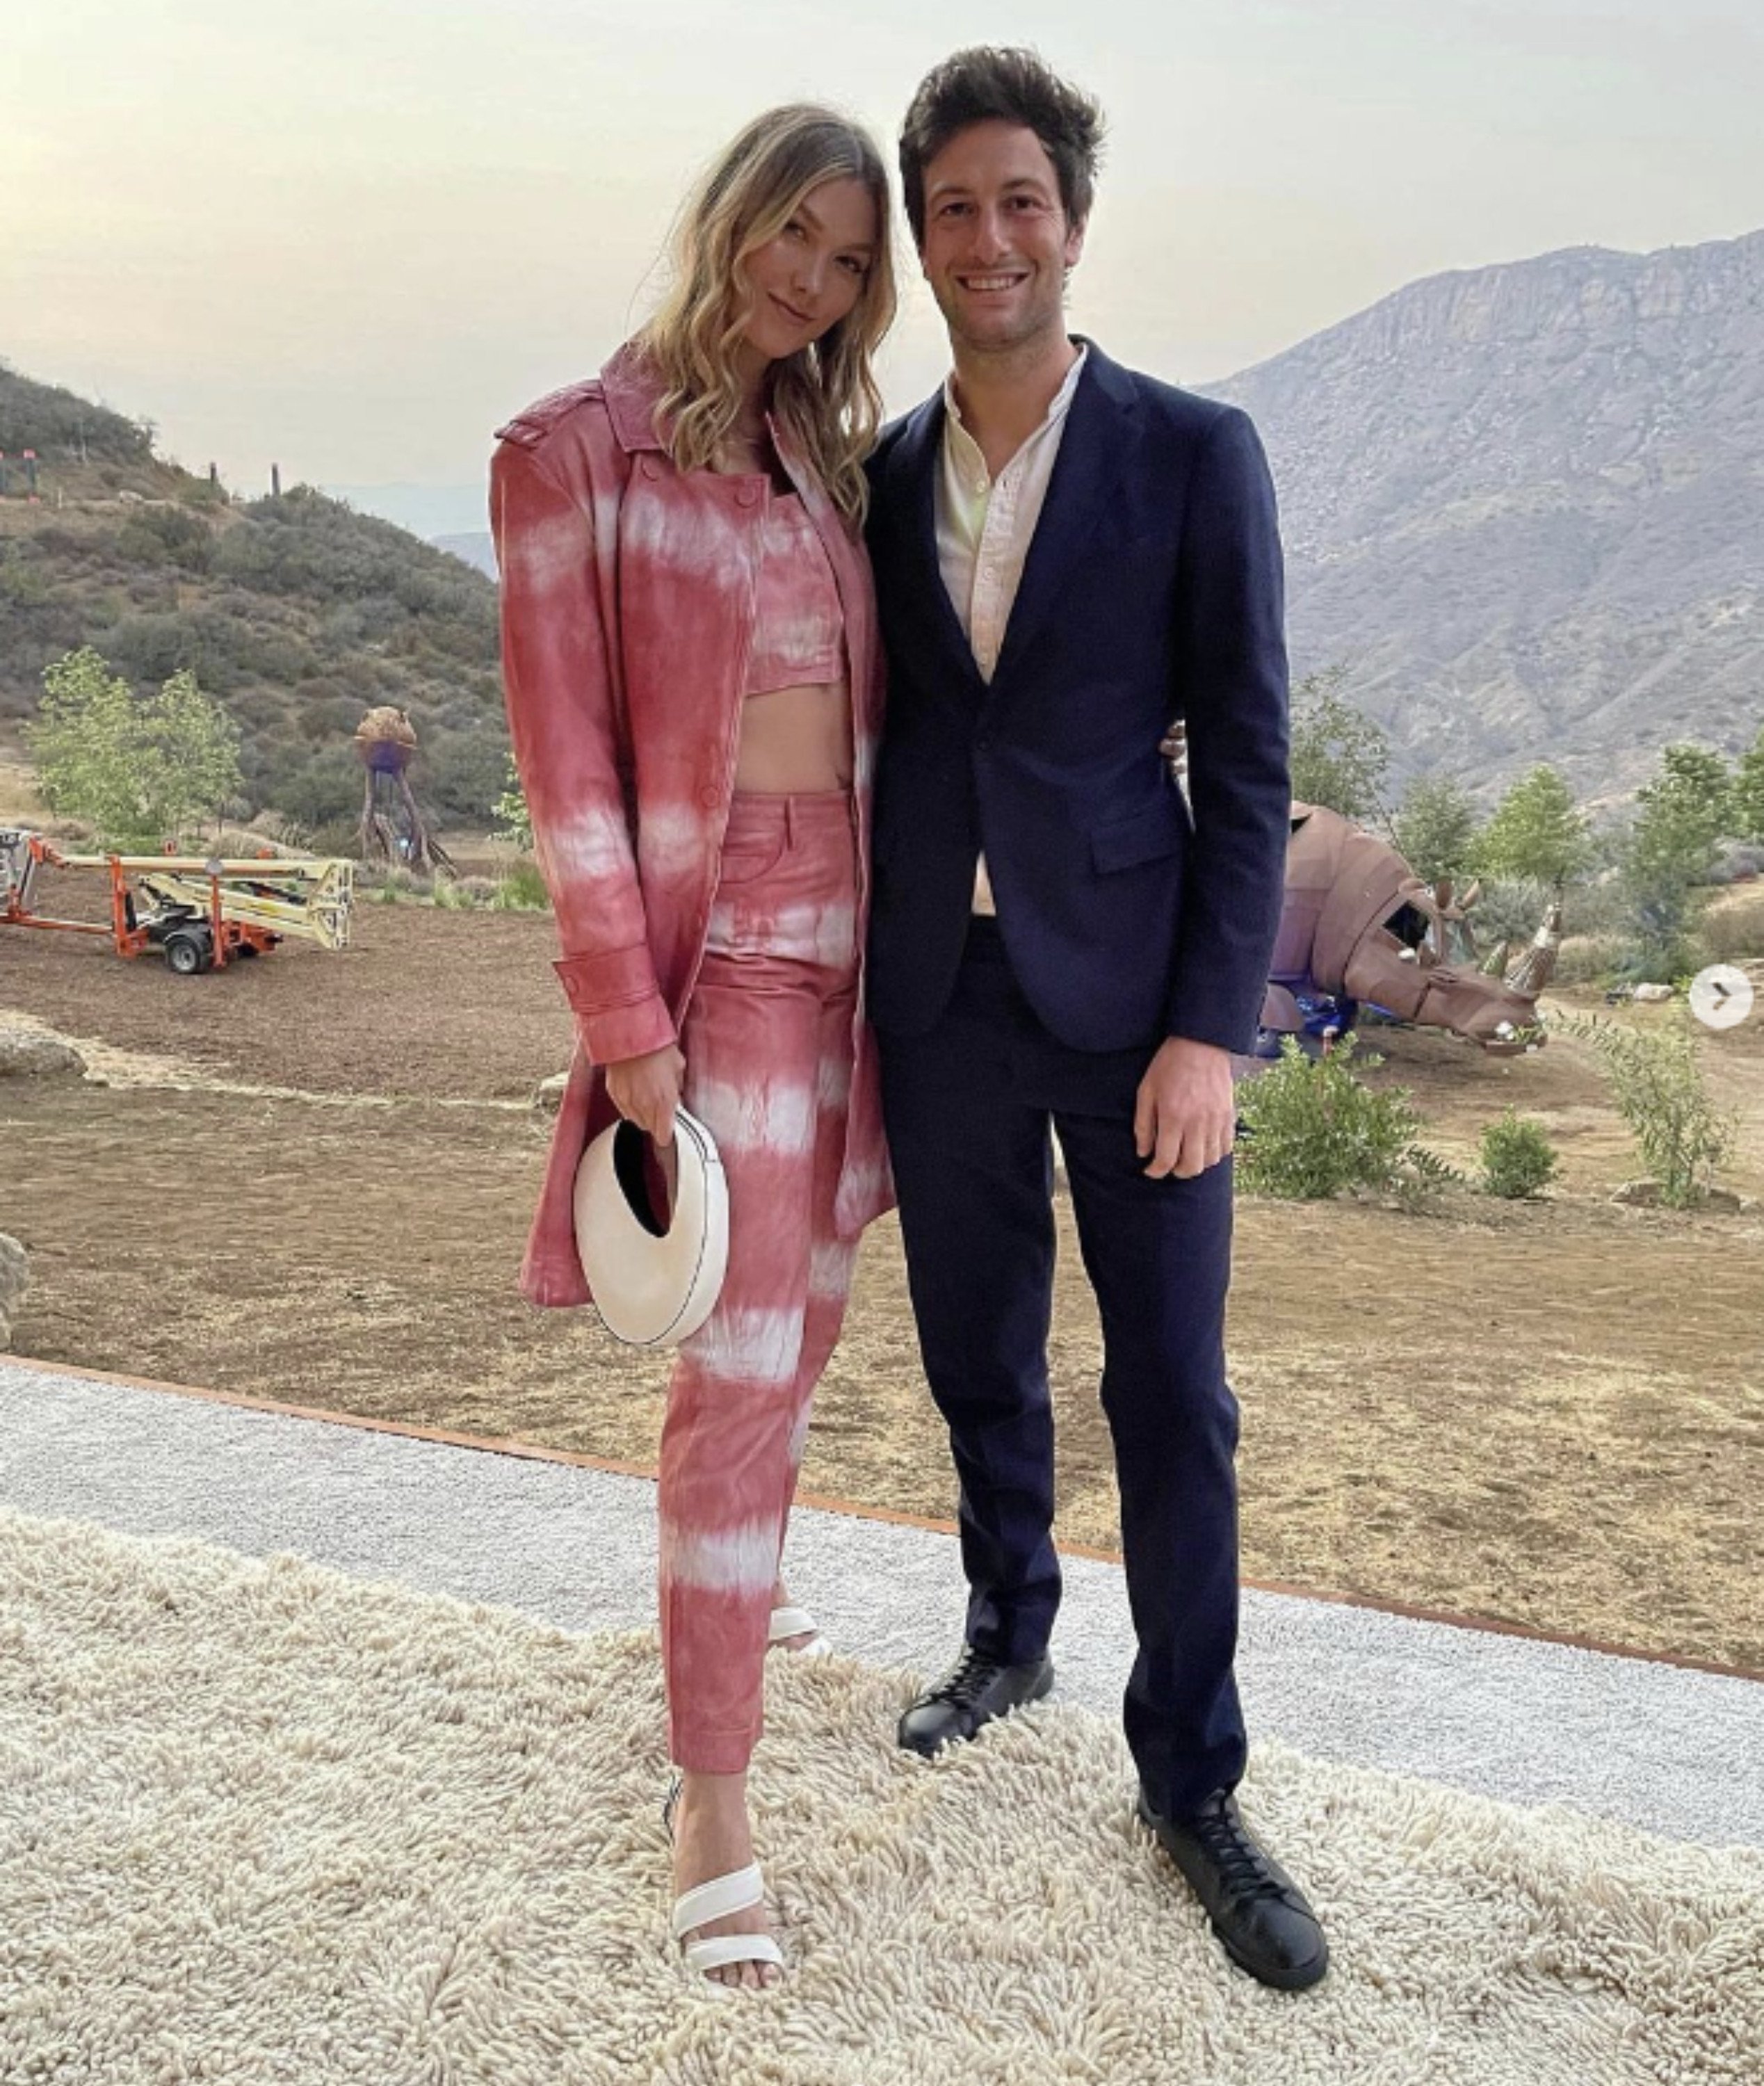 Karlie Kloss and Joshua Kushner live a life of luxuries. Read on to find out more. Photo: @karliekloss/Instagram